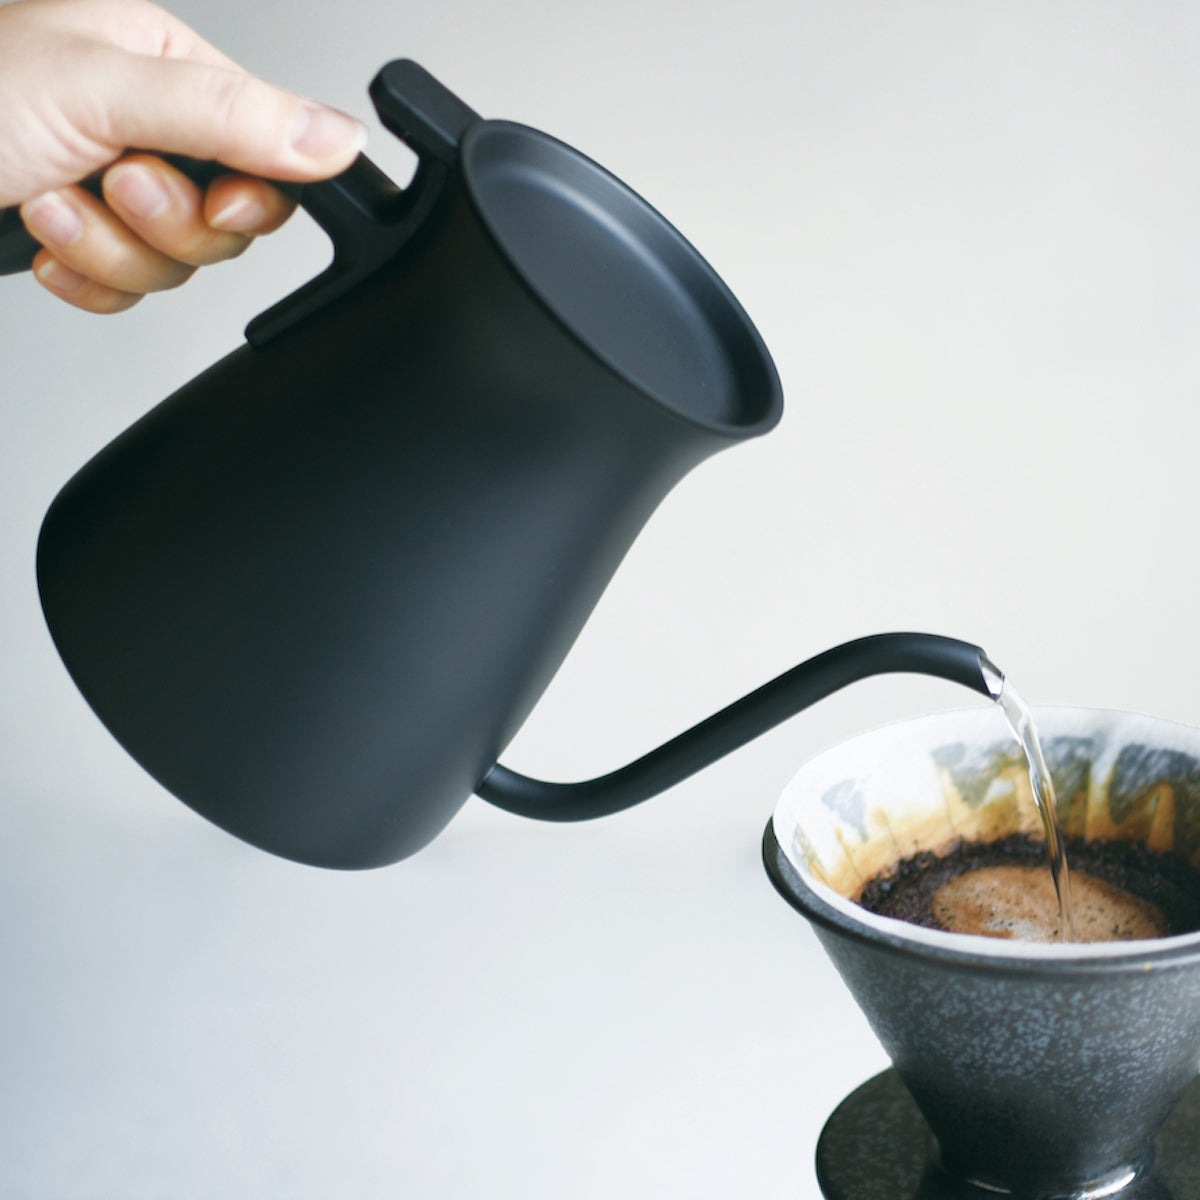 Kinto Pour Over Kettle Pouring| THE COFFEE GOODS